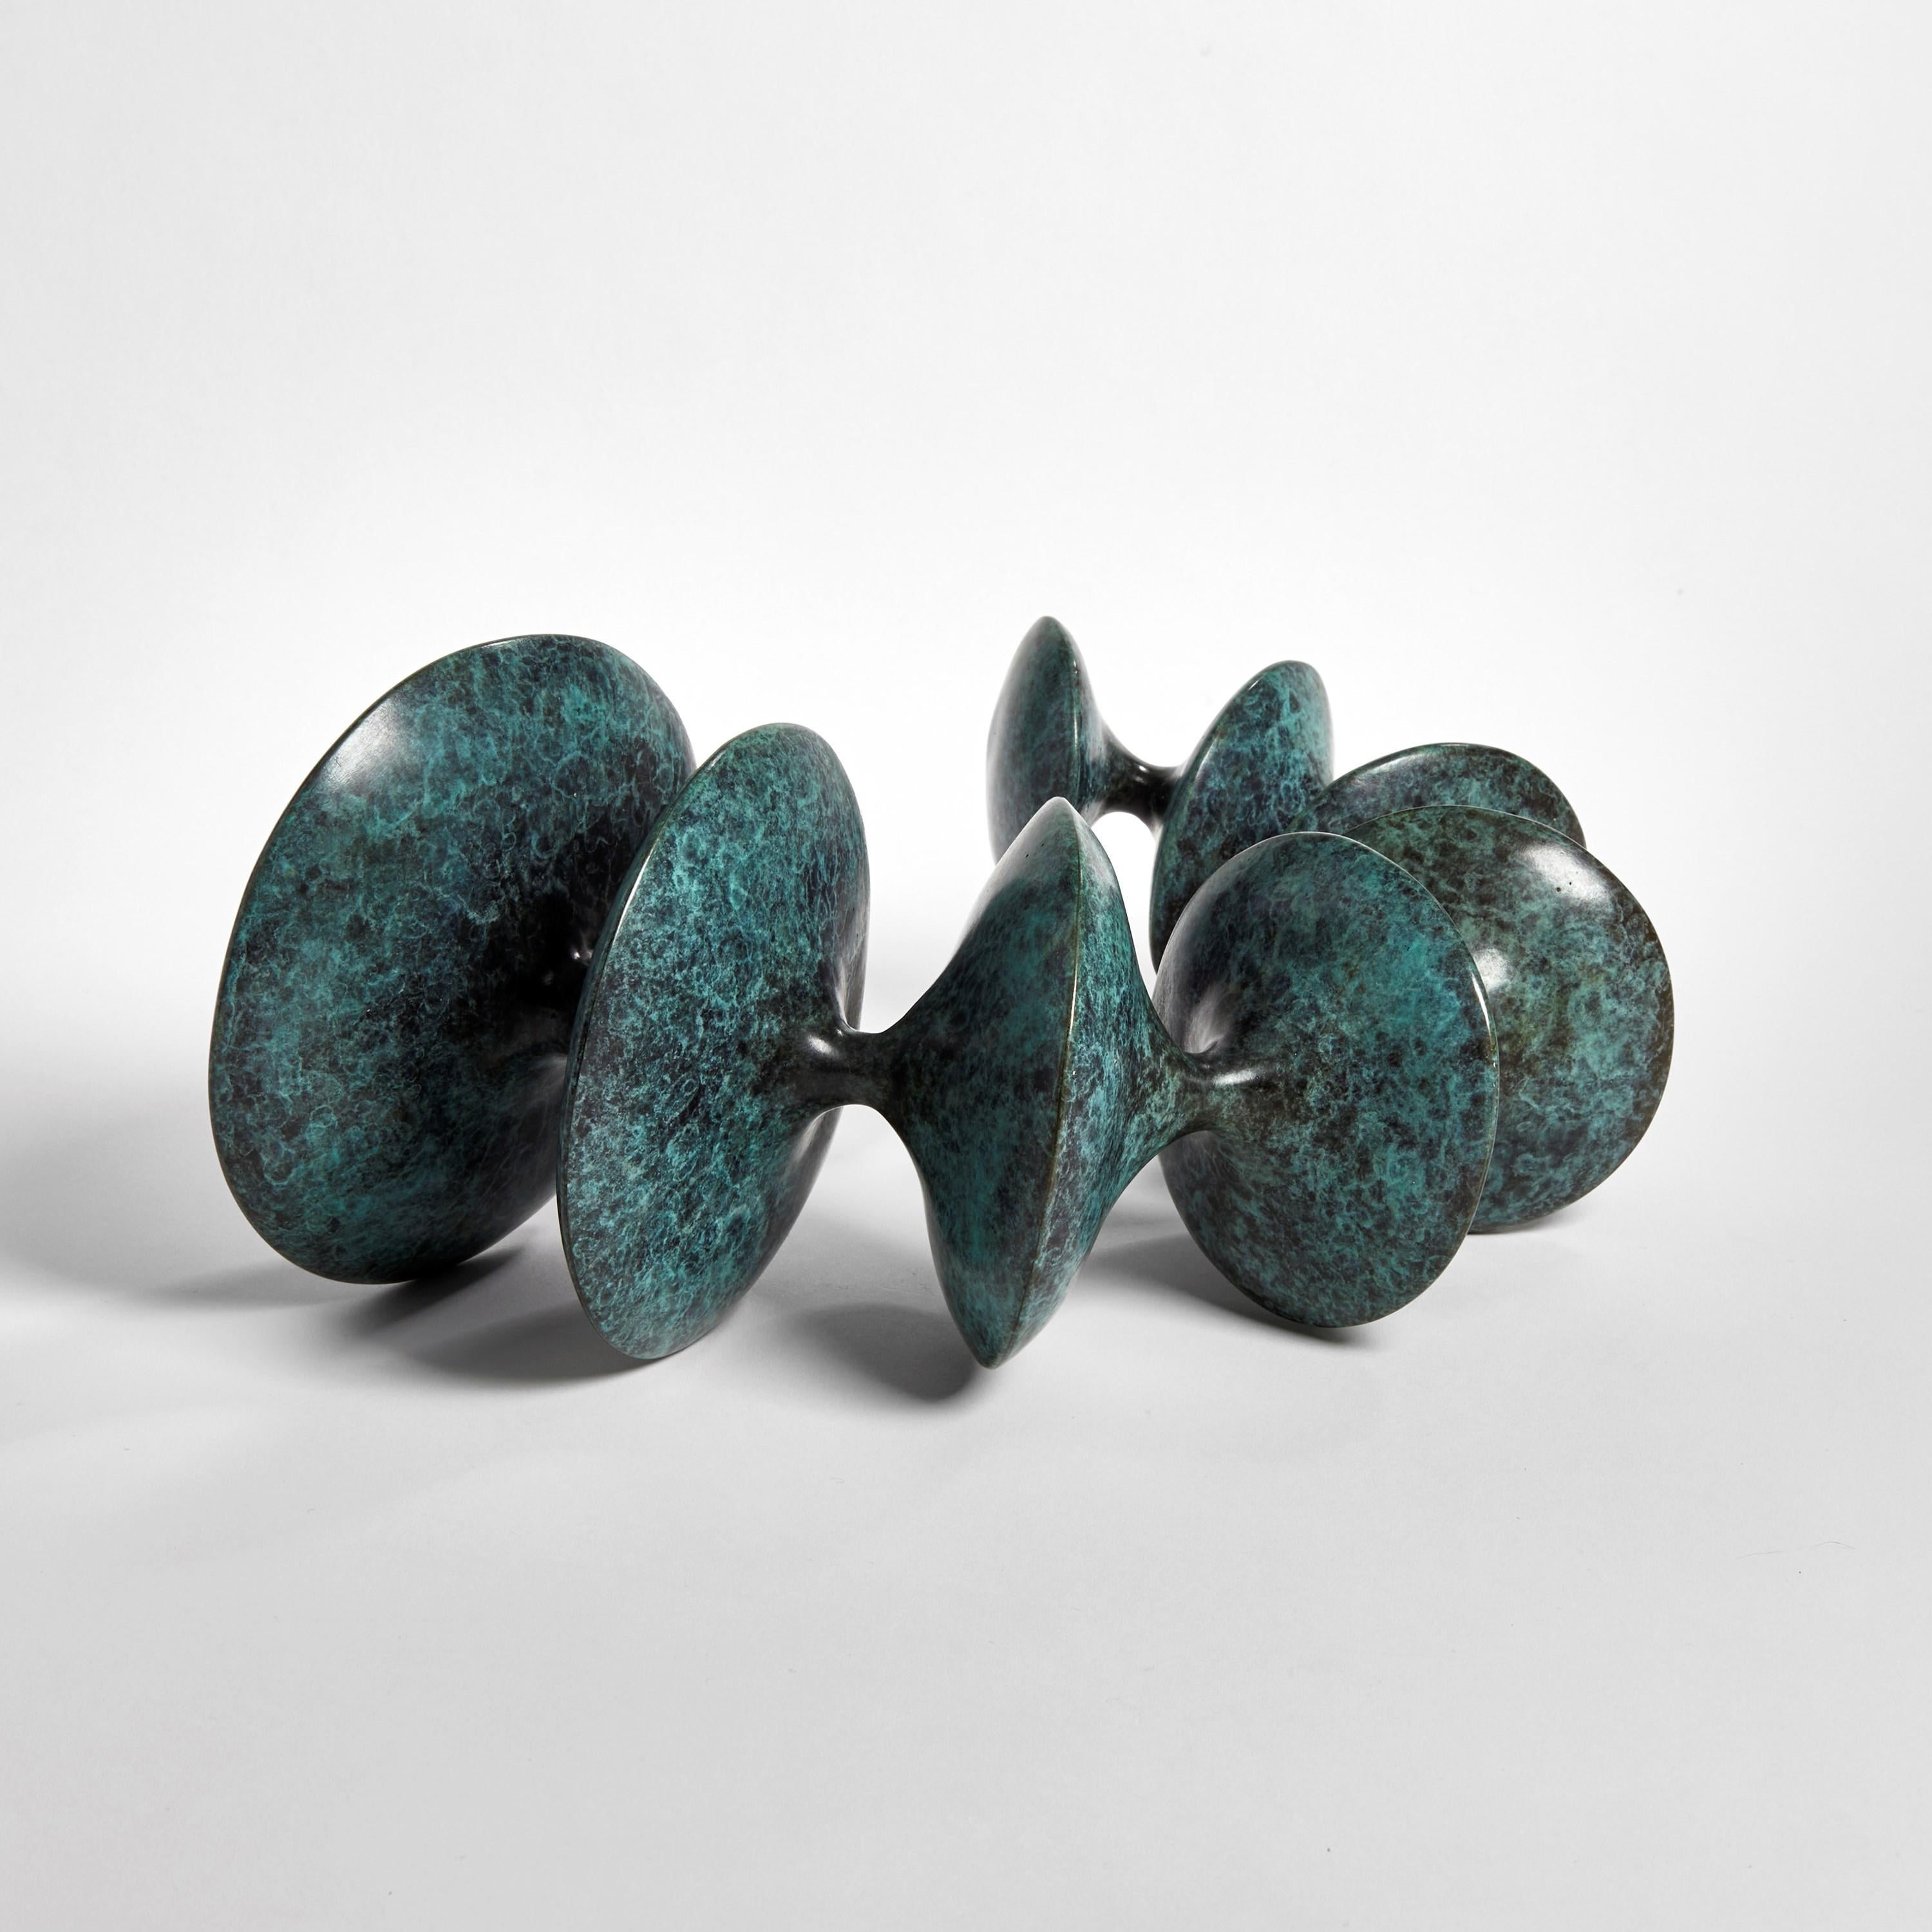 Organic Modern Torc, a limited edition patinated bronze sculpture by Vivienne Foley For Sale